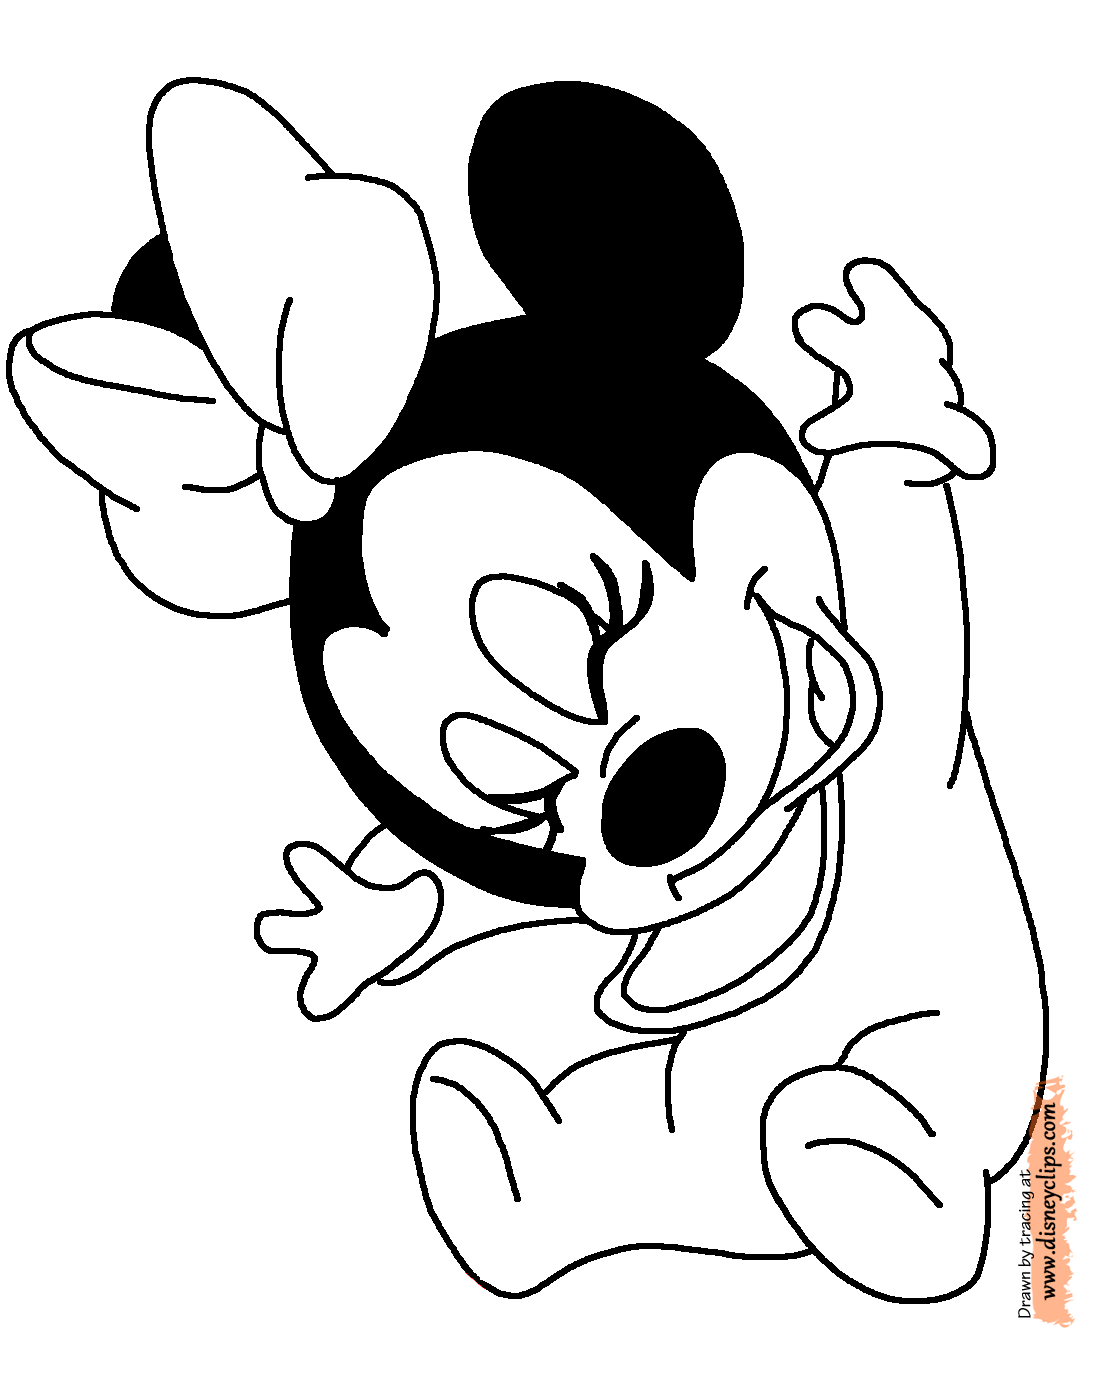 Download Best Baby Disney Character Coloring Pages Free | Big Collection Free Printable Coloring